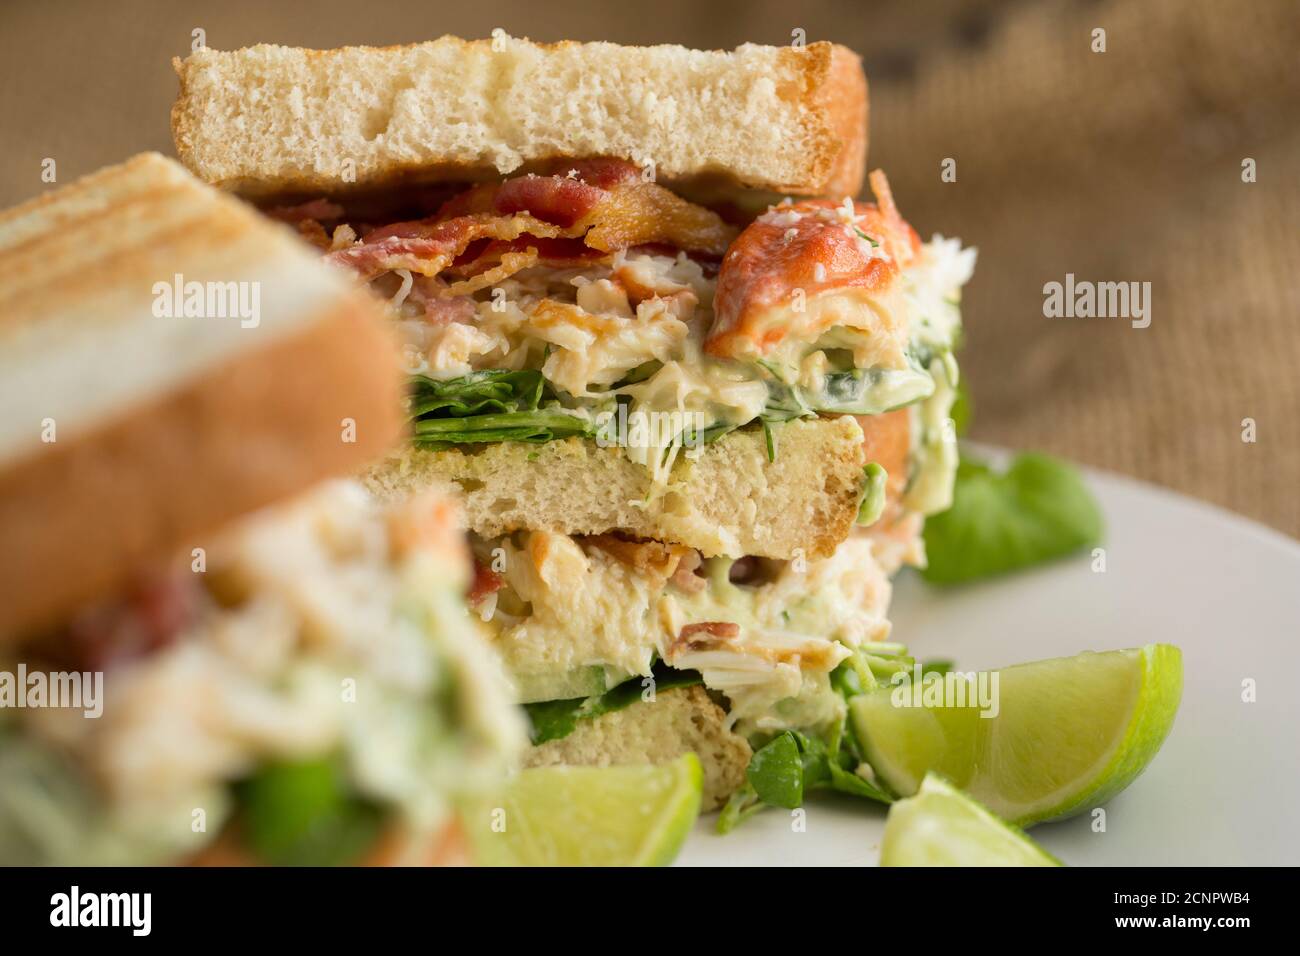 A crab sandwich on toasted bread made from a brown crab, Cancer pagurus, dressed with mayonnaise, lime, dill, avocado, salad and crispy smoked bacon. Stock Photo